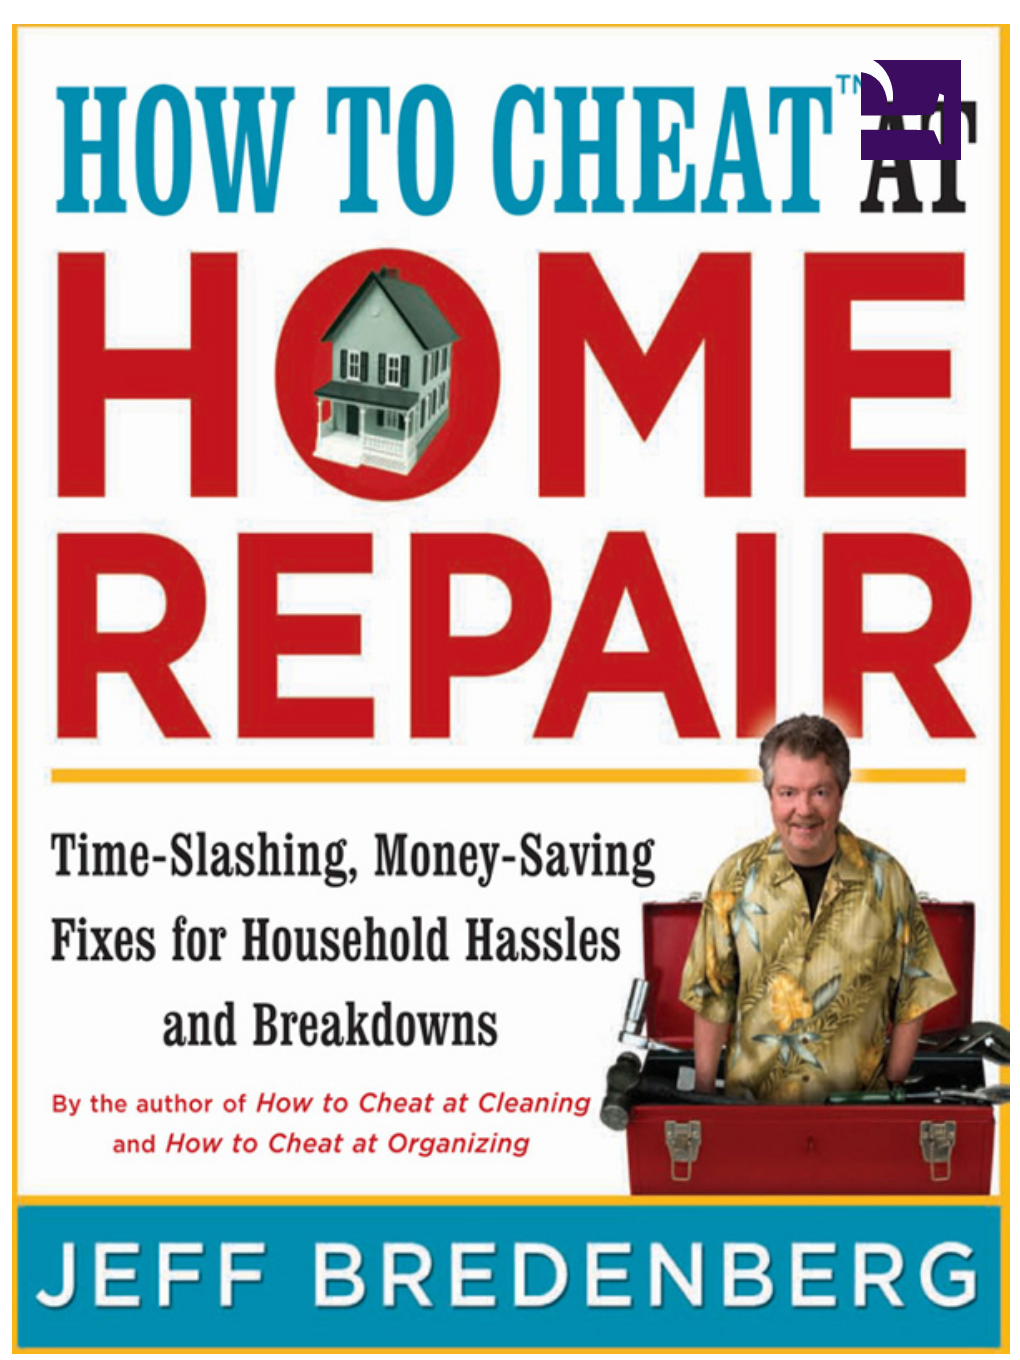 How to Cheat ™ at Home Repair